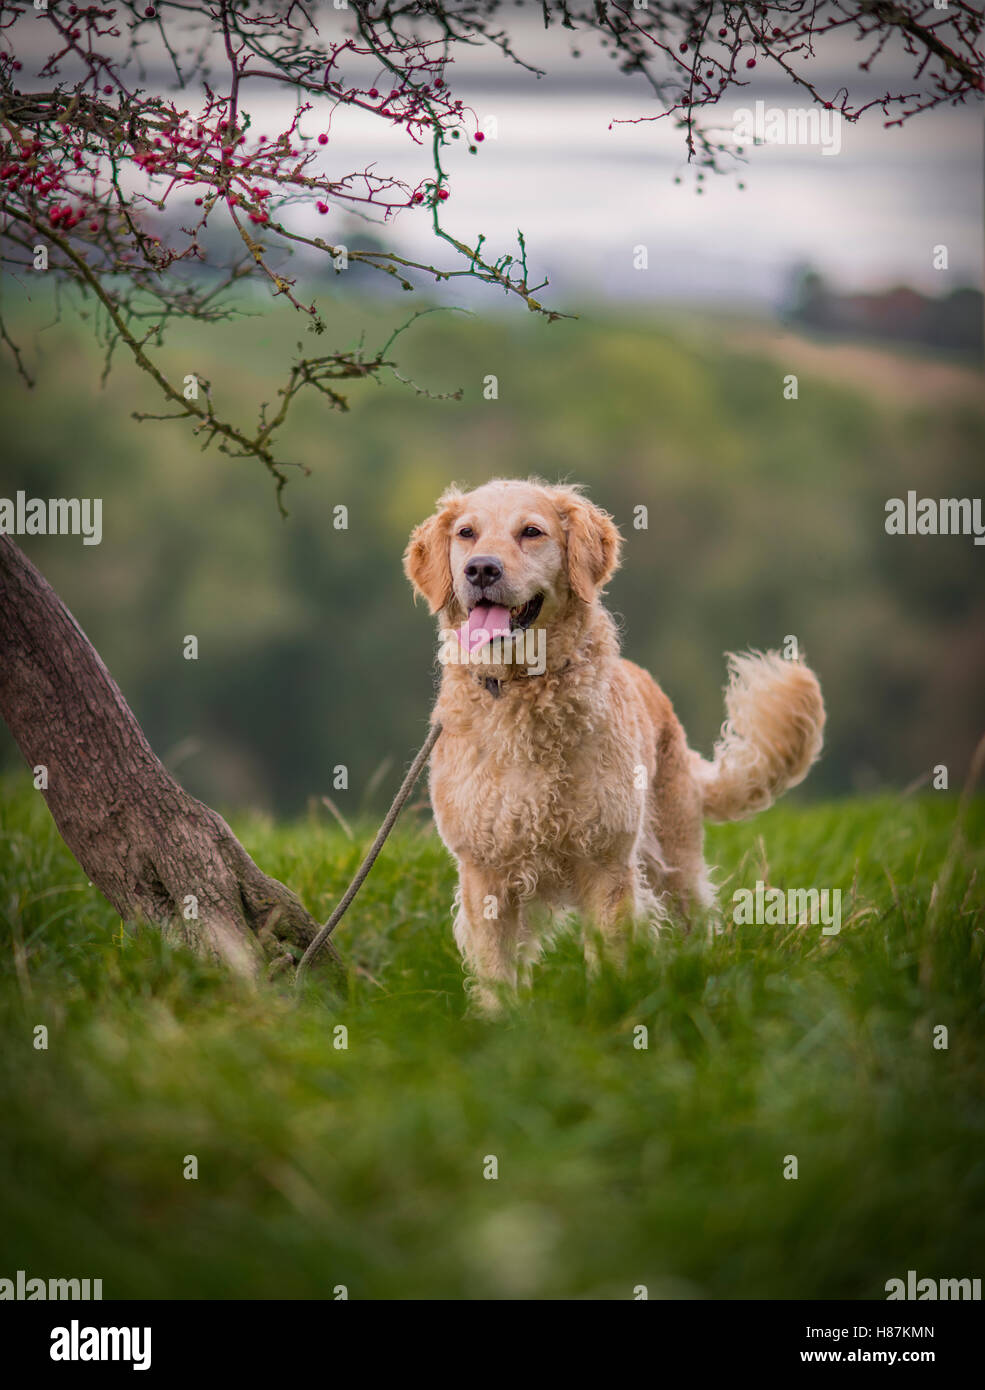 Labradoodle, a cross between a poodle and labrador, this dog has stronger Labrador traits. Stock Photo